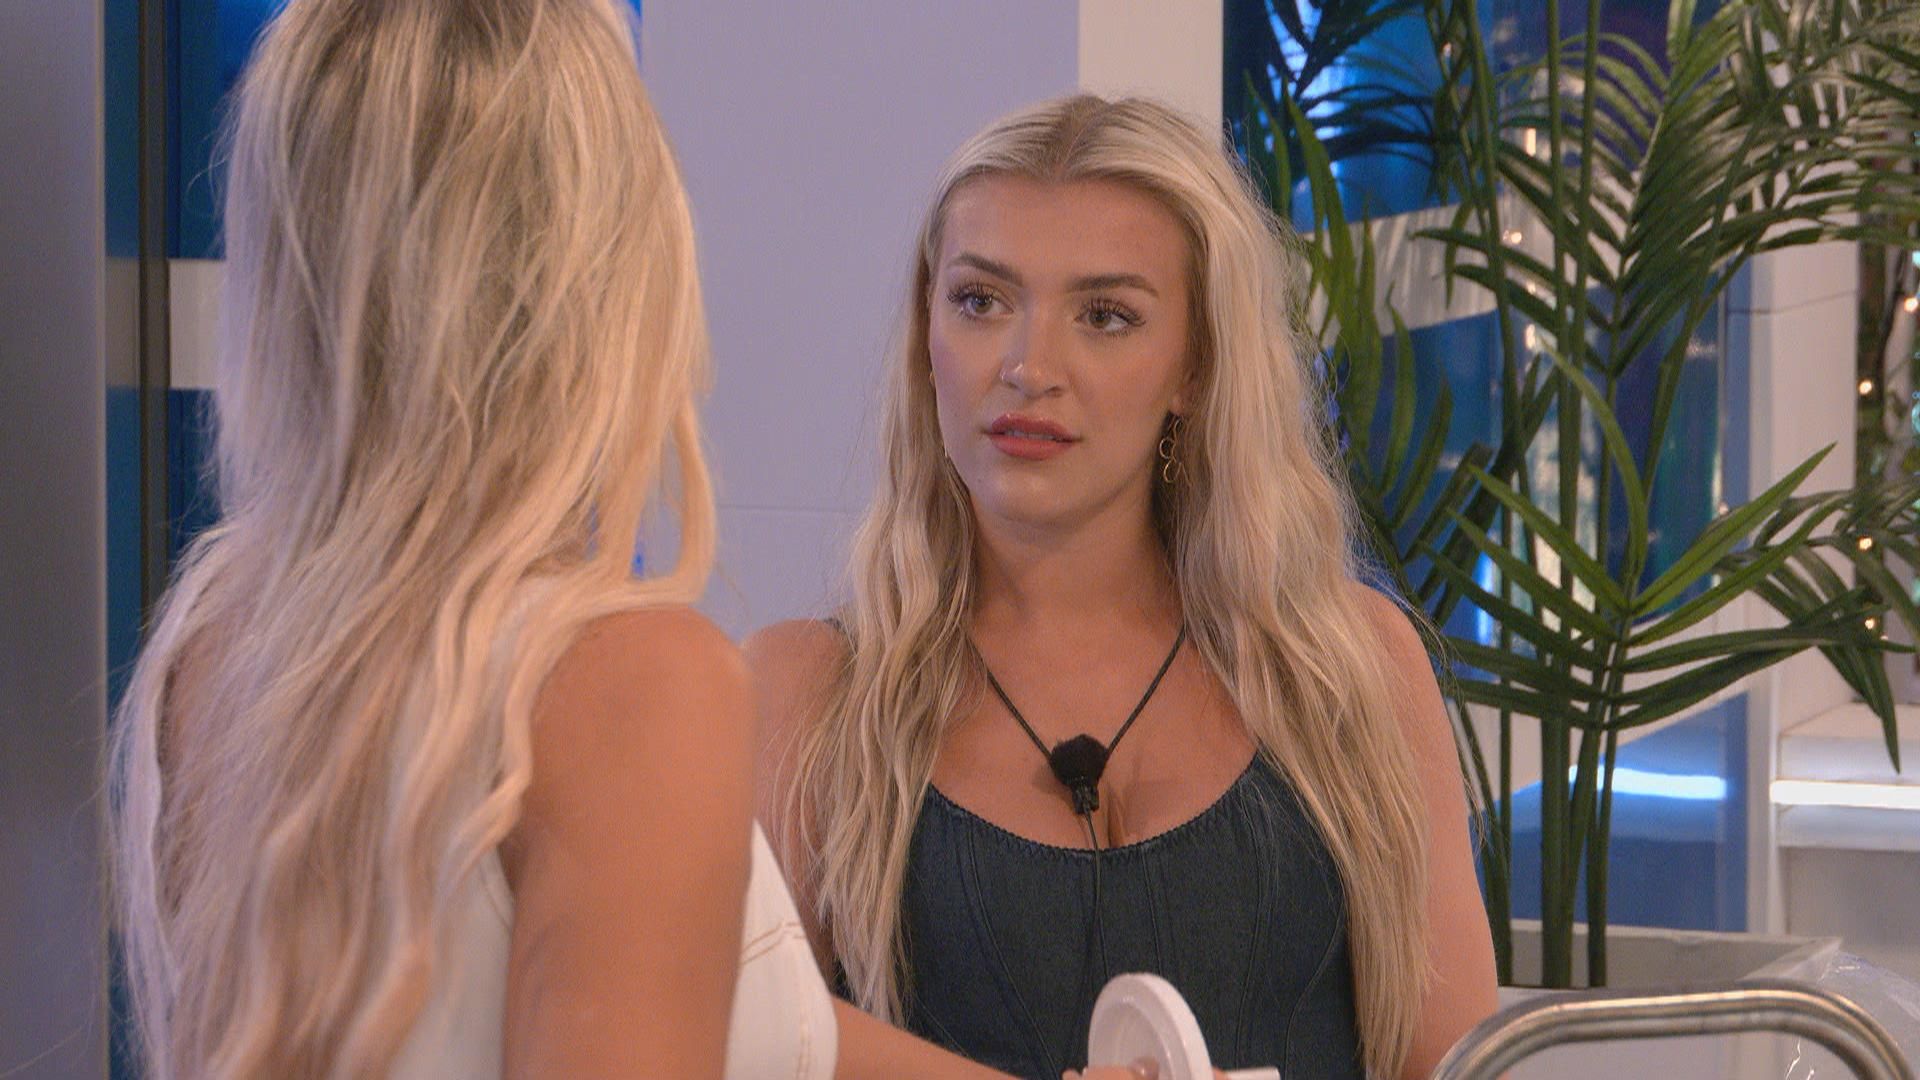 Jess confronted Molly in tonight's episode of Love Island